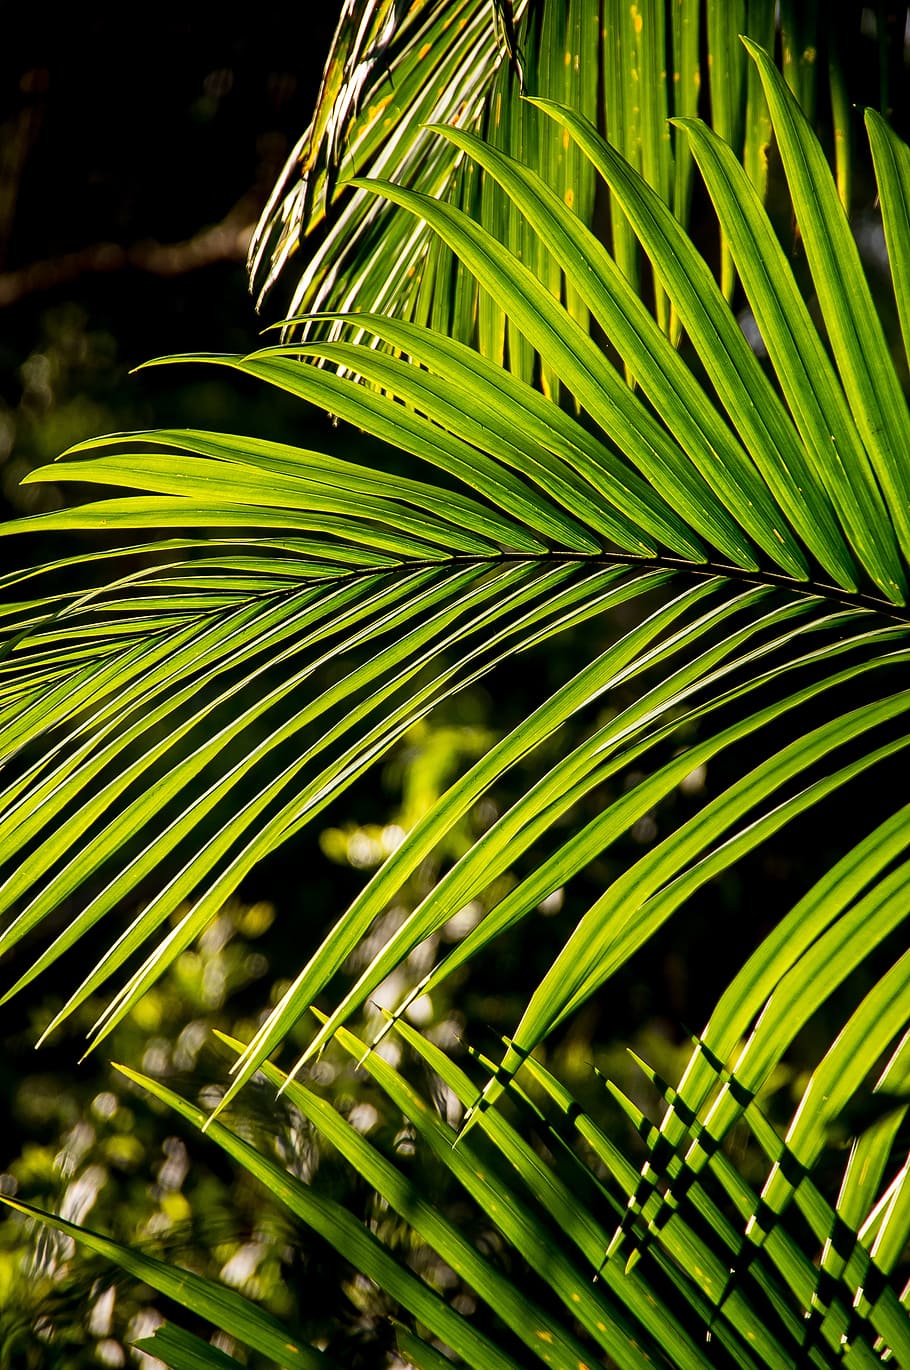 palm, bangalow palm, frond, rain forest, forest, australia, queensland, green, native, sub-tropical